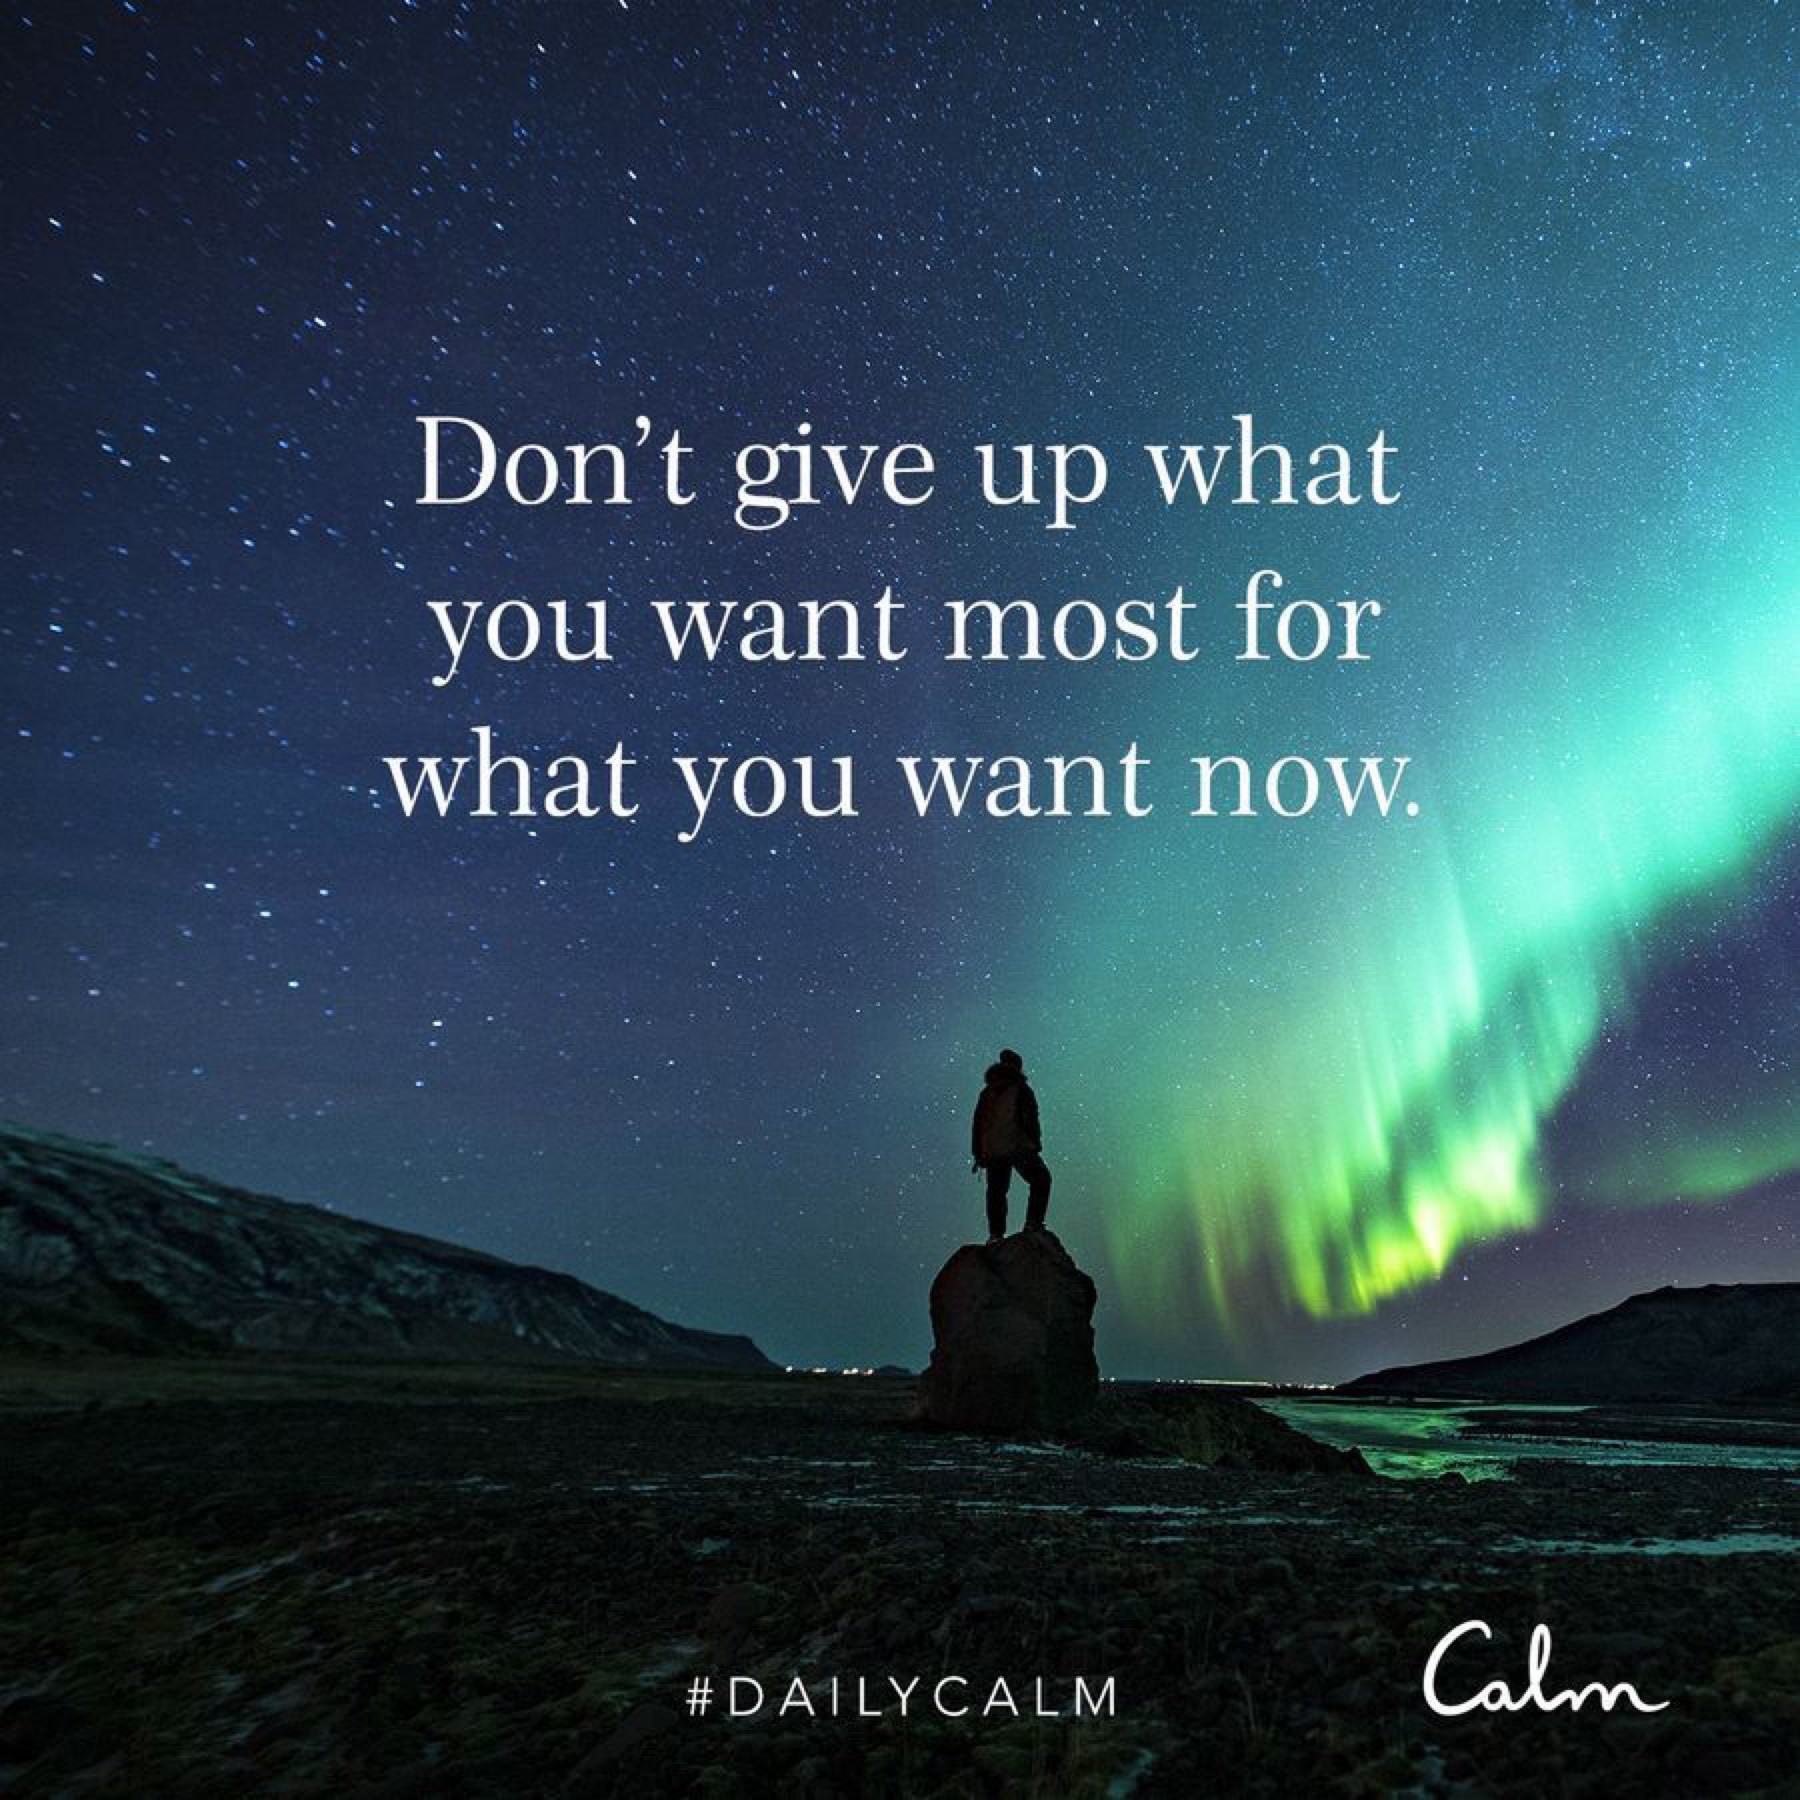 Don't give up what you want most for what you want now